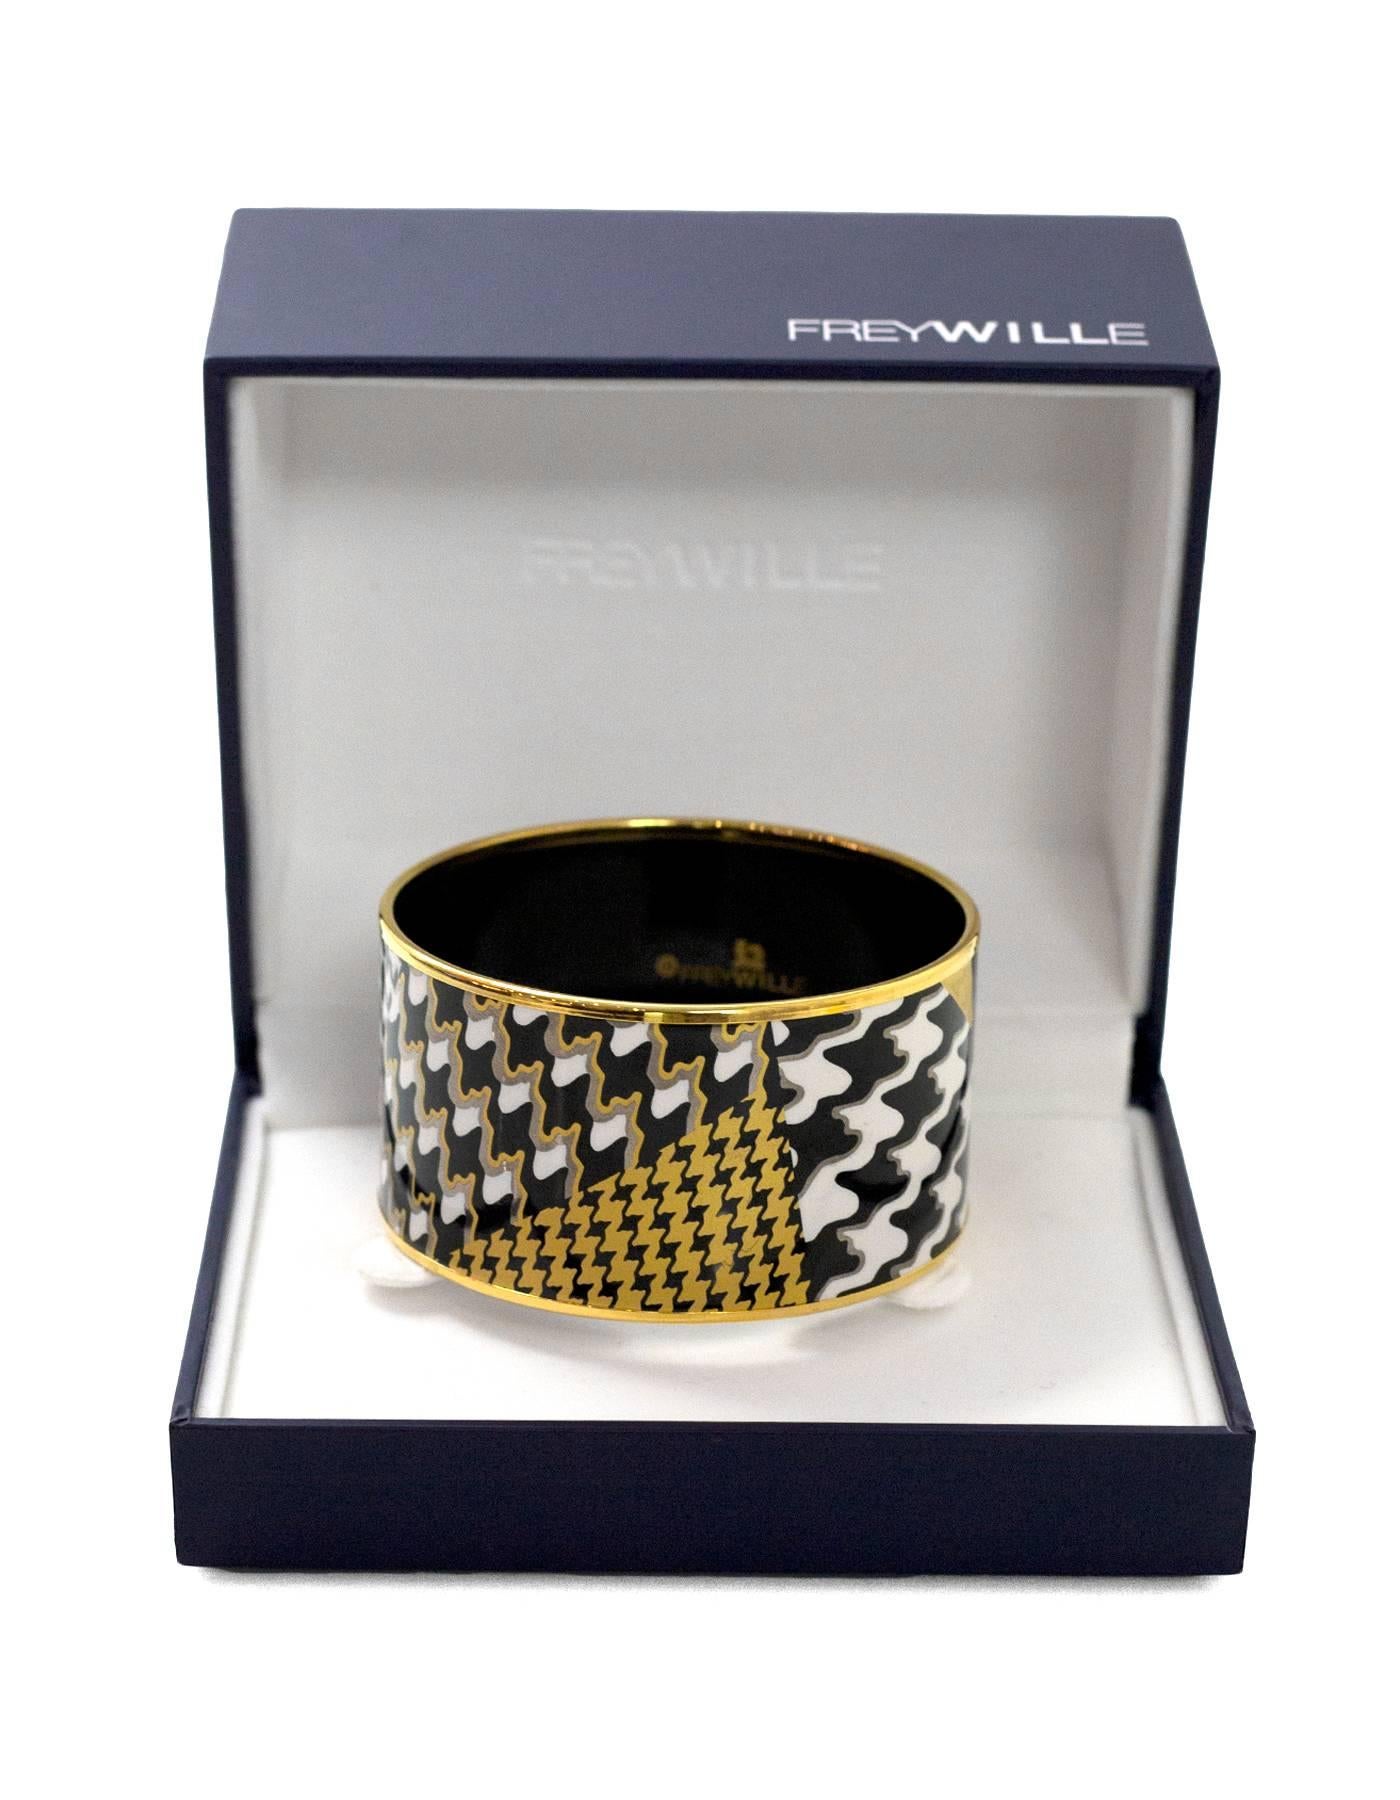 Frey Wille Houndstooth Fire 24k Gold & Enamel Wide Bangle with Box 2